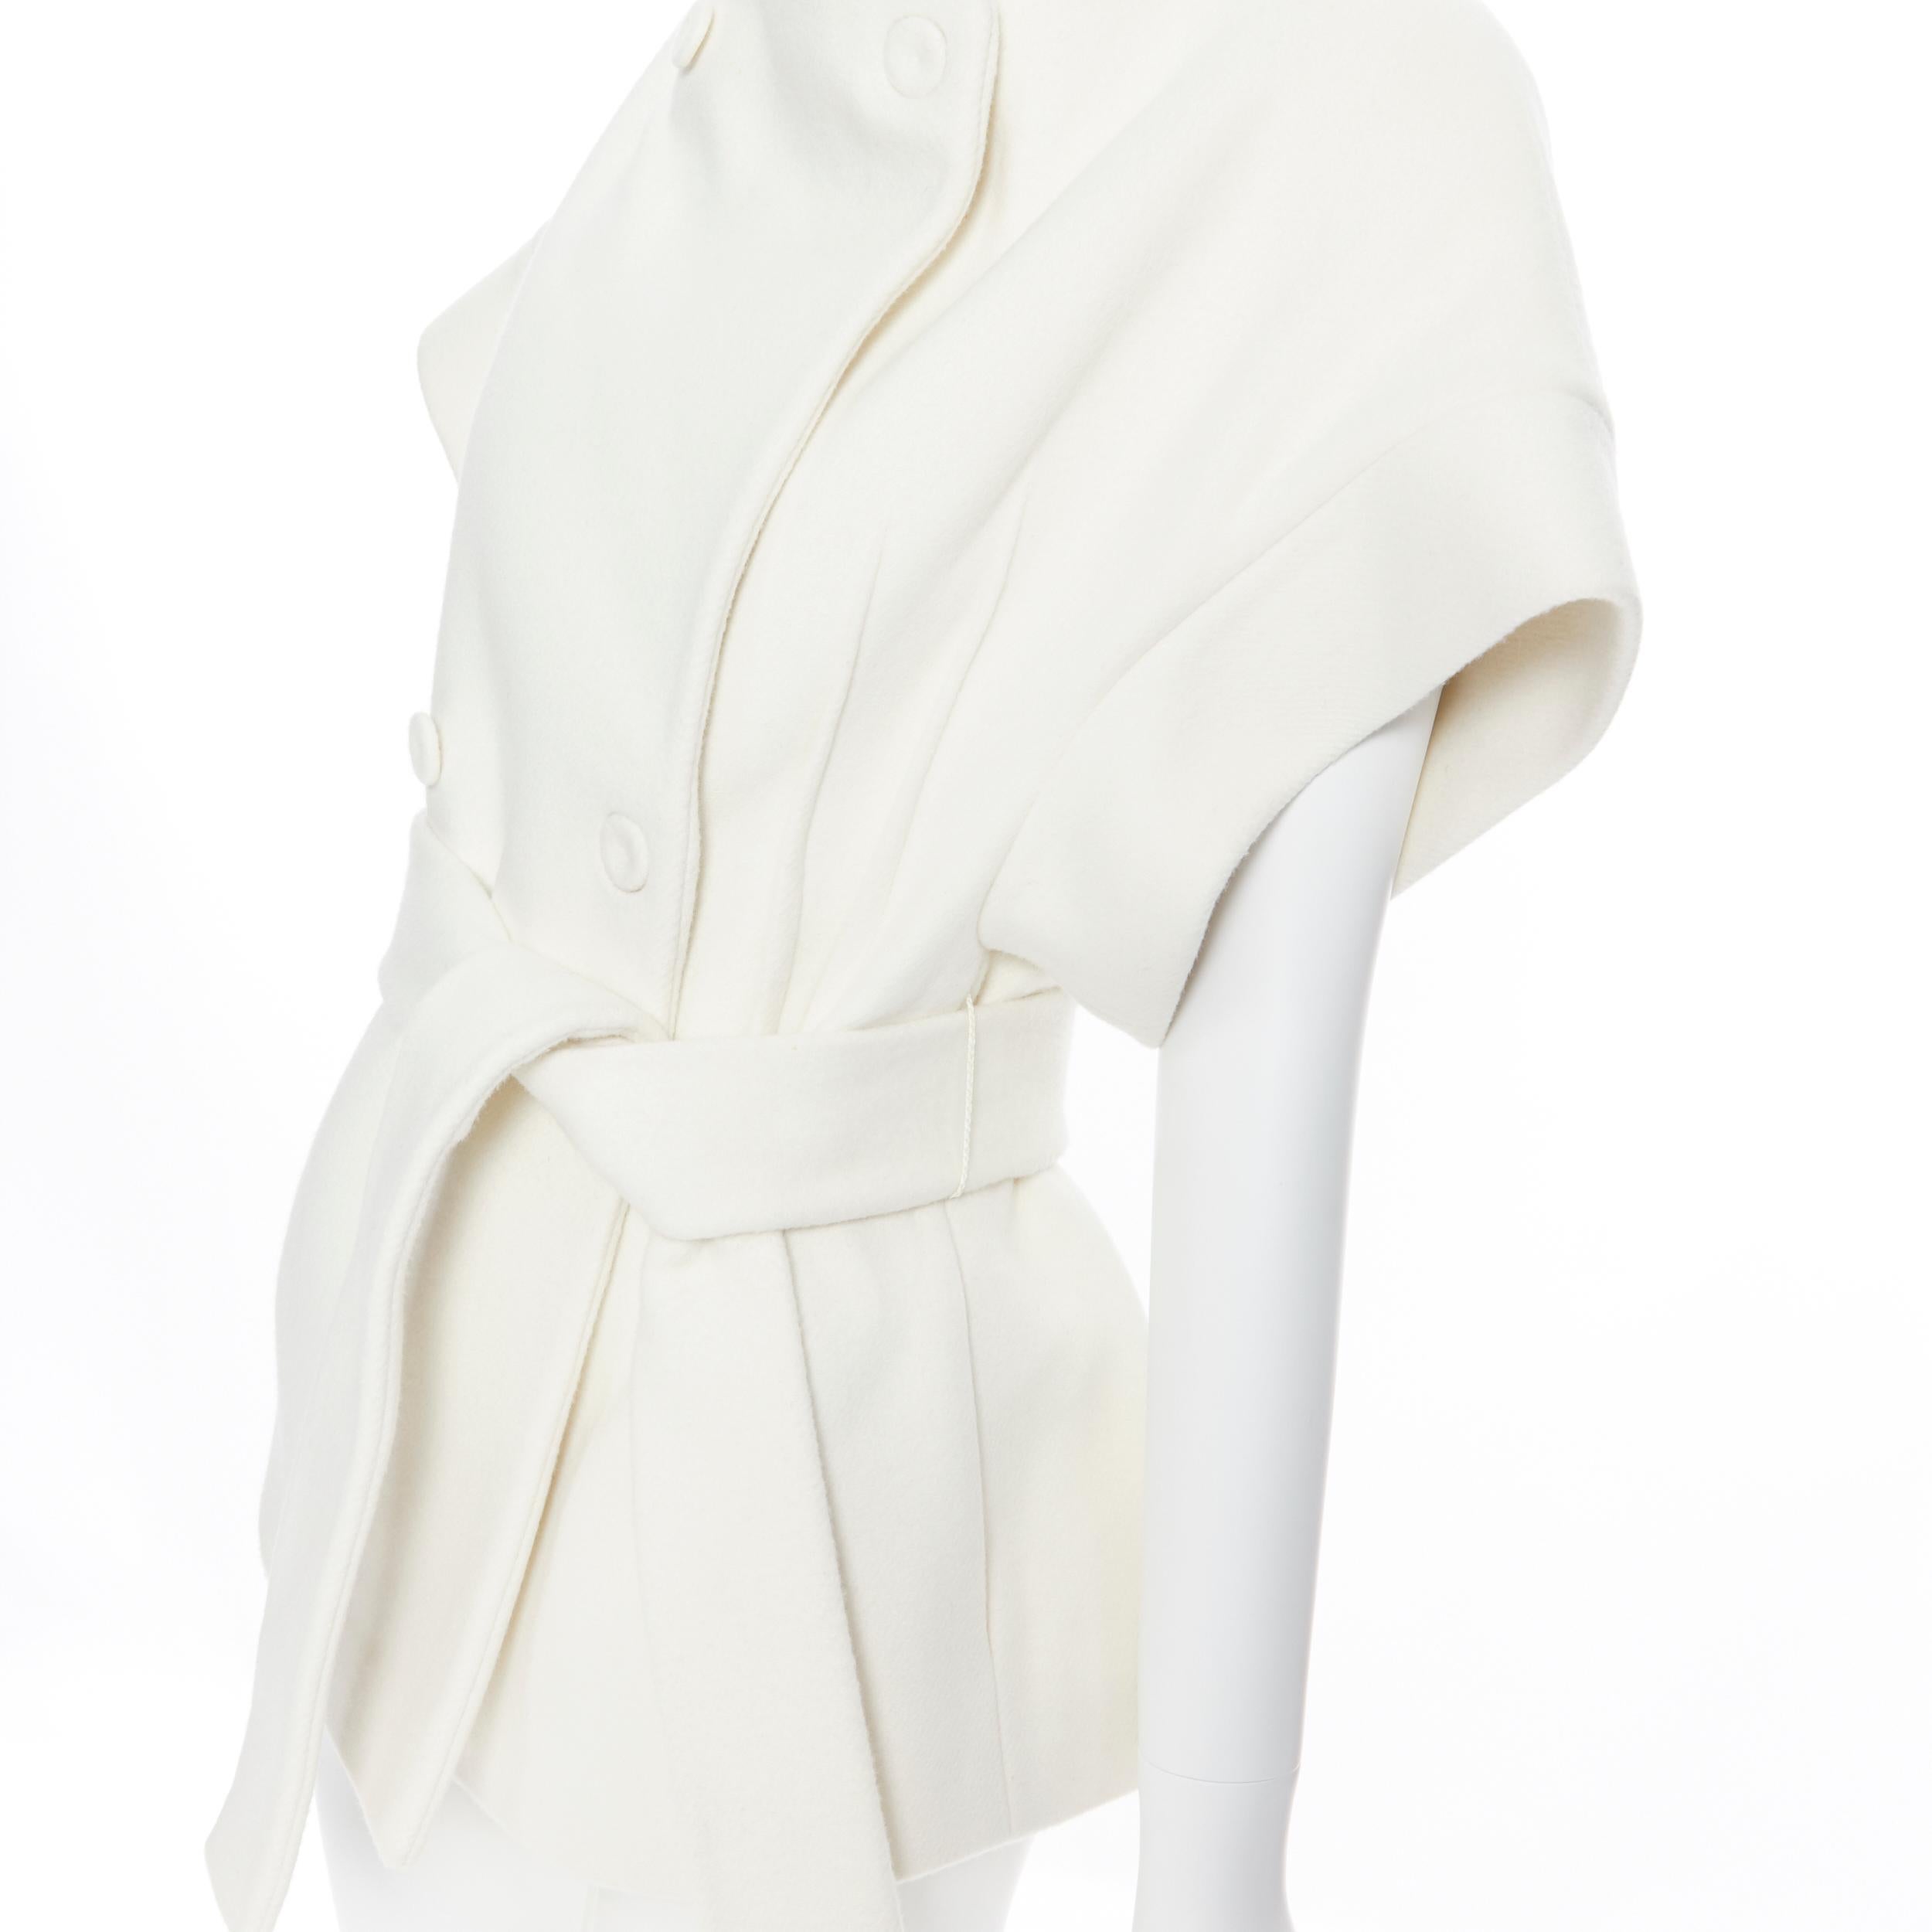 CALVIN KLEIN COLLECTIONS white wool reversed seam belted cocoon coat IT36 XS
Brand: Calvin Klein Collections
Model Name / Style: Wool coat
Material: Wool
Color: White
Pattern: Solid
Extra Detail: Exposed pinched seams at waist for fit. Sunken tonal